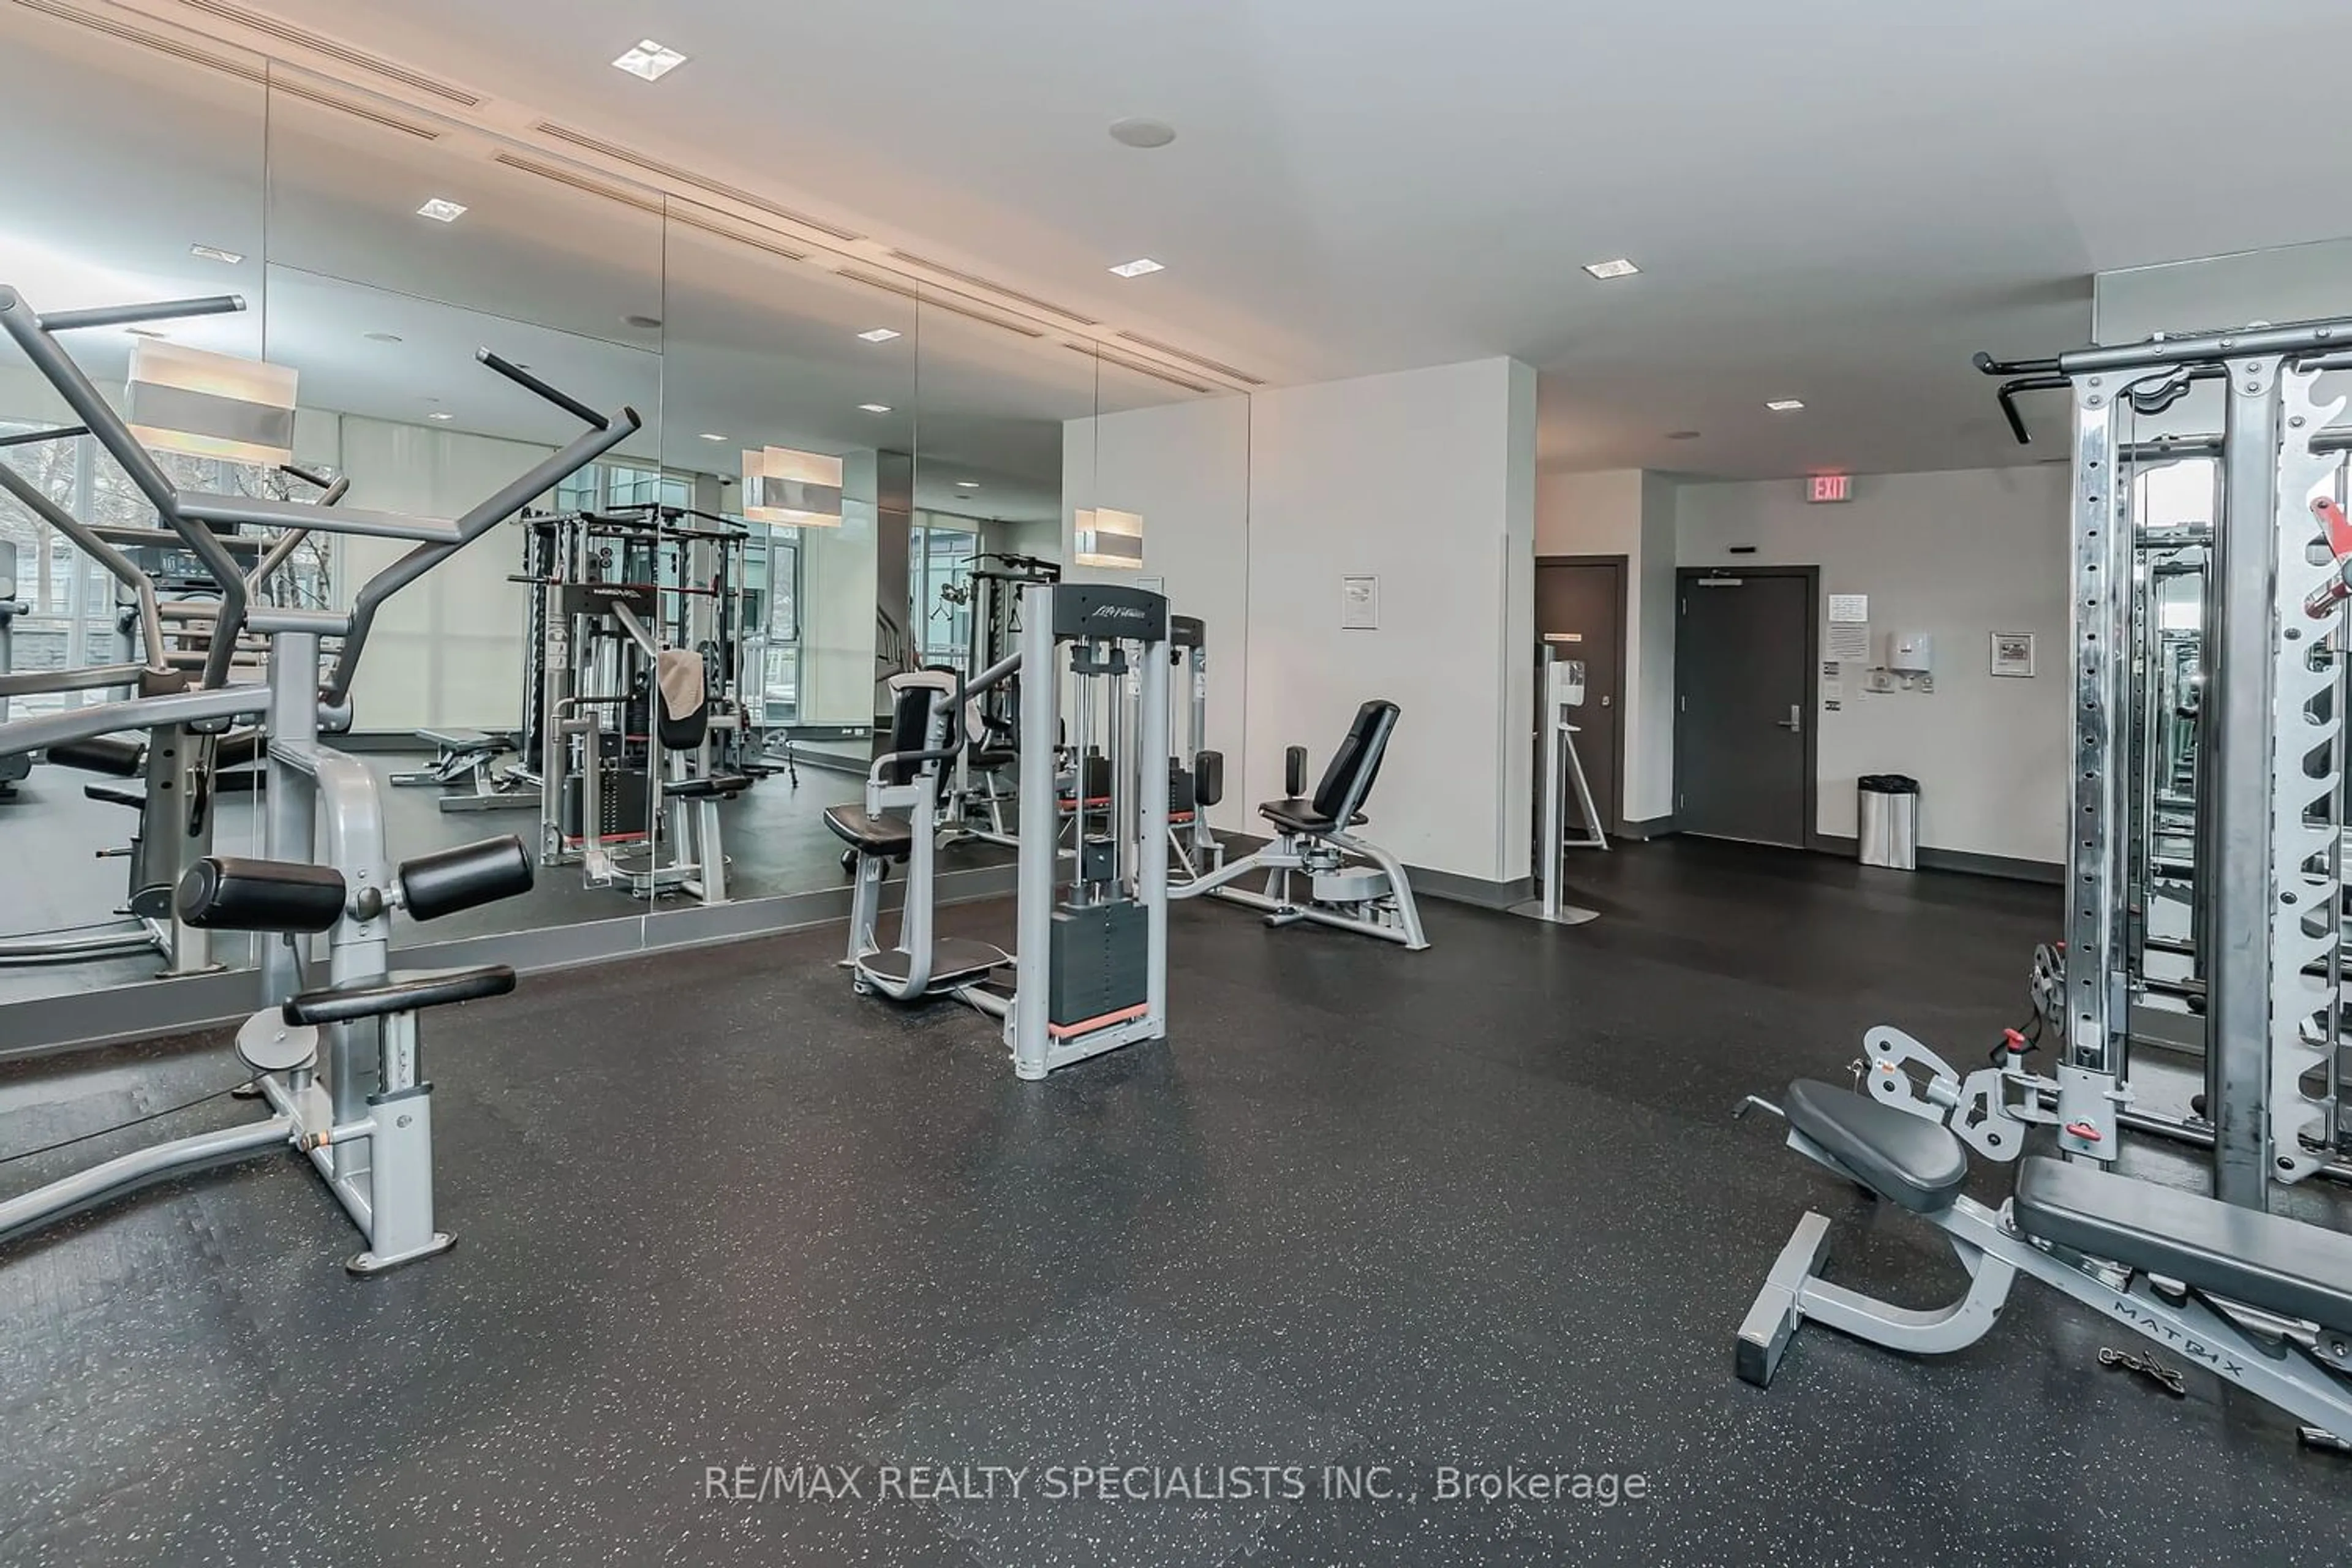 Gym or fitness room for 4065 Brickstone Mews #3006, Mississauga Ontario L5B 0G3